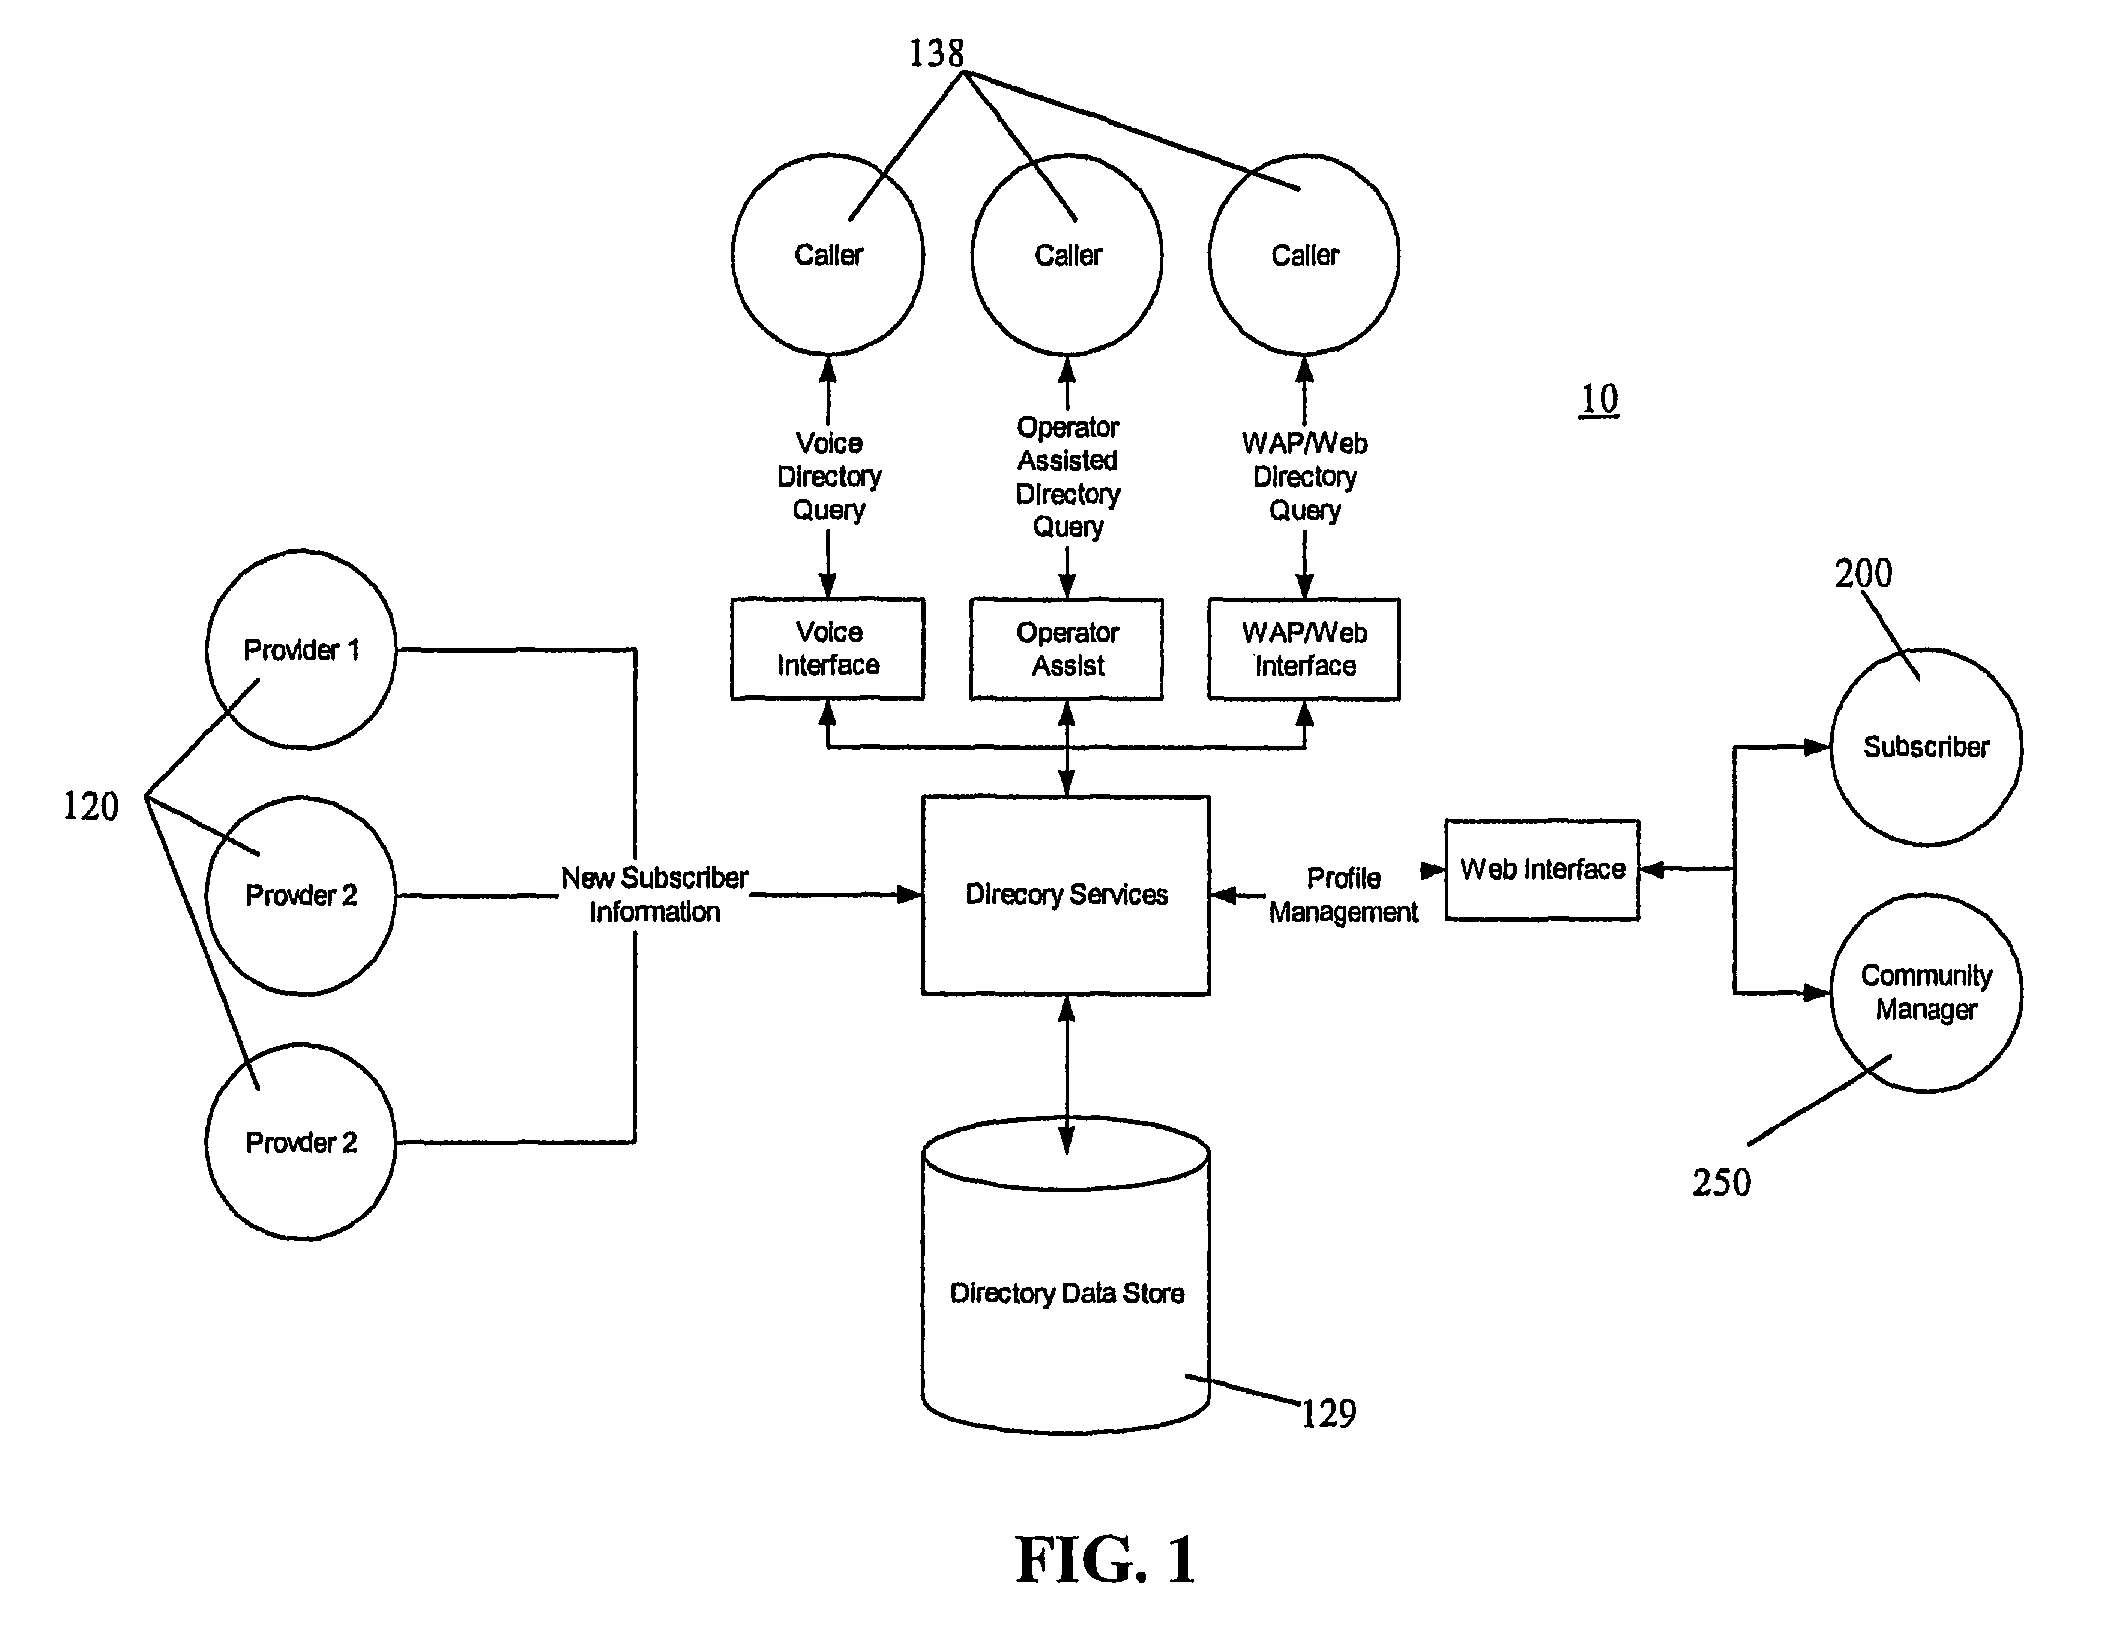 Communication connectivity via context association, advertising sponsorship, and multiple contact databases